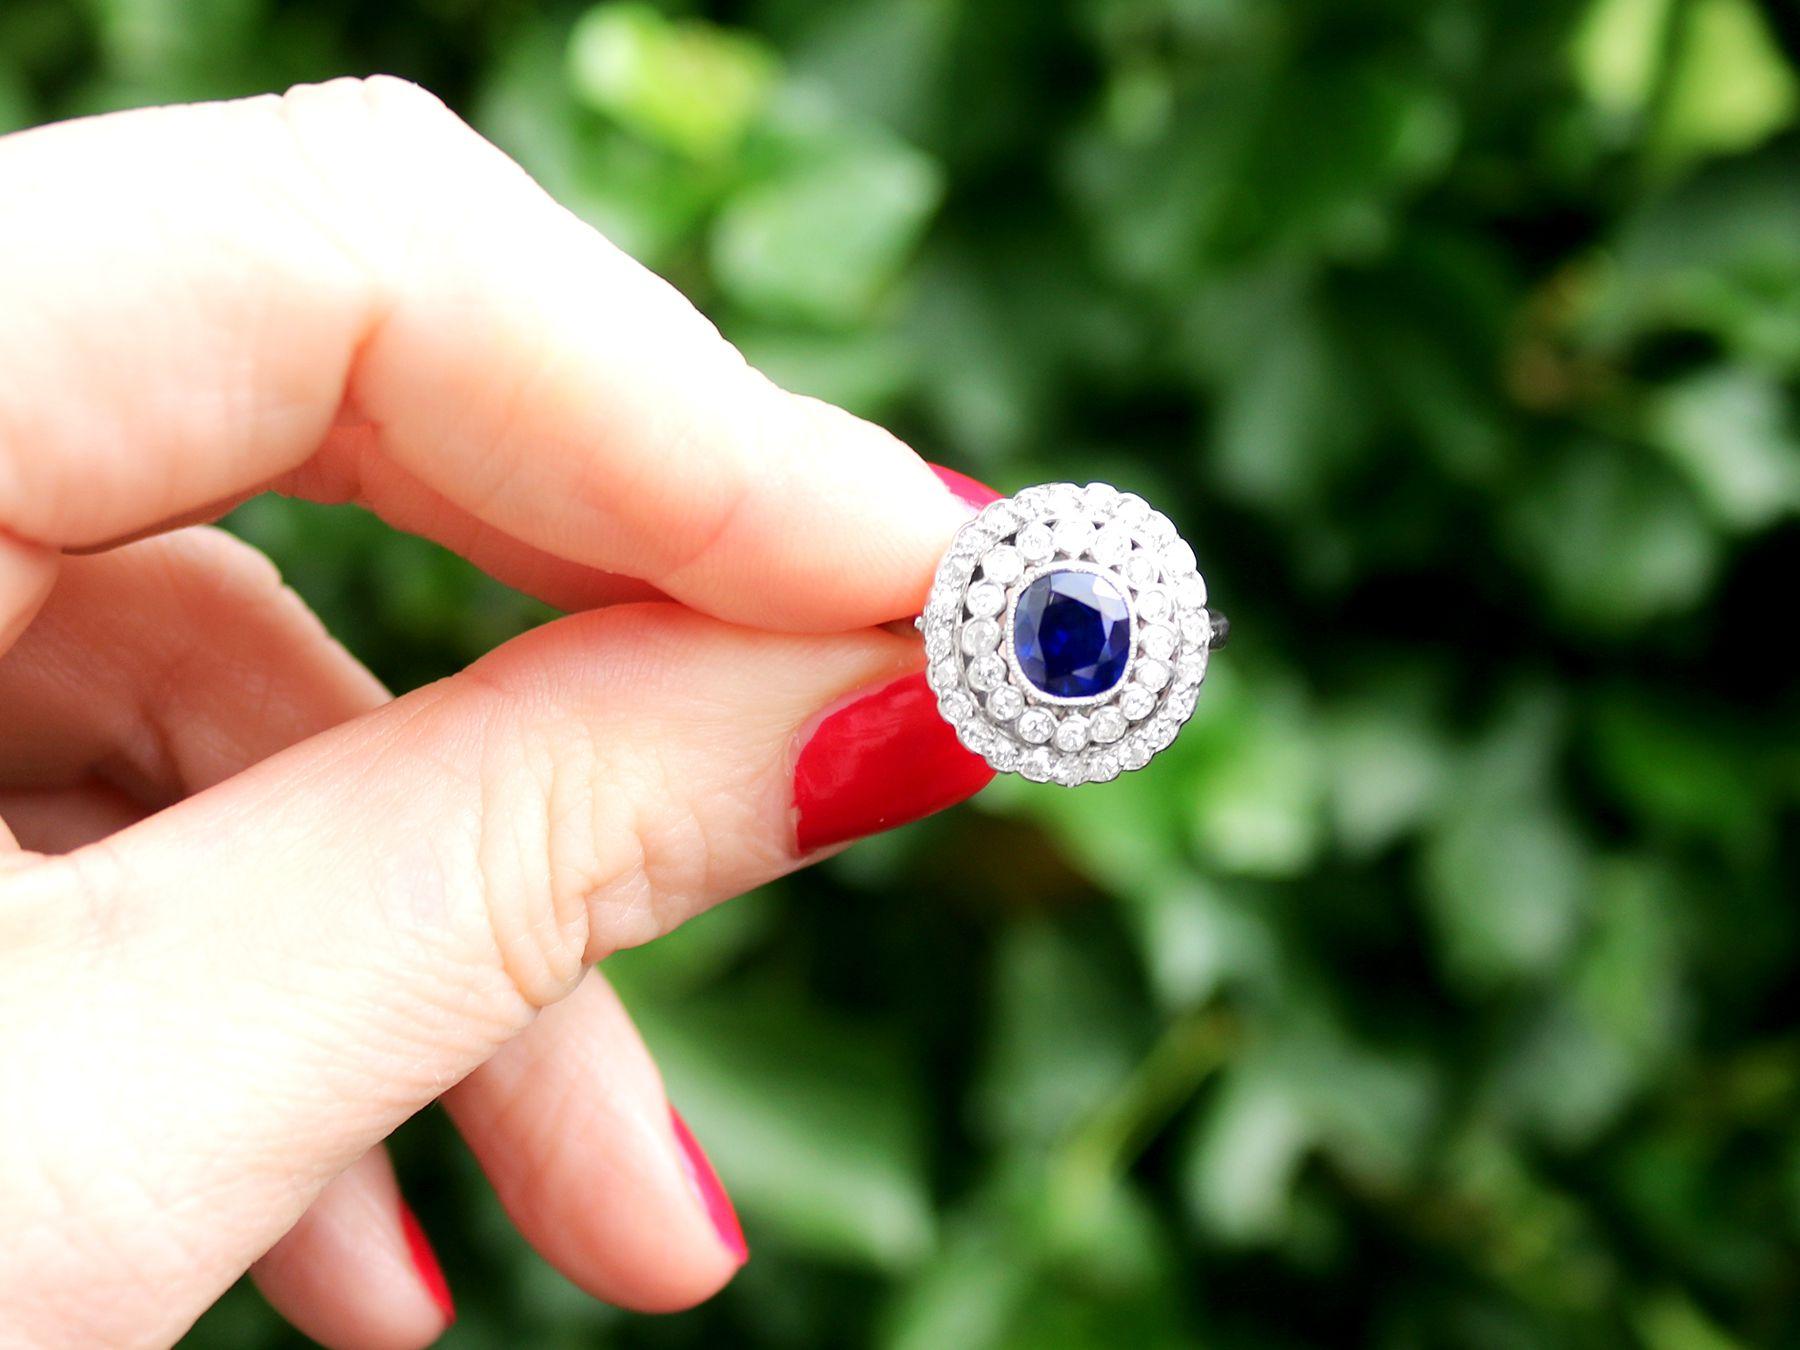 A stunning antique French 1.90 carat natural blue sapphire and 1.10 carat diamond, 18 karat white gold and platinum set cluster ring; part of our diverse antique jewelry collections.

This stunning, fine and impressive natural sapphire and diamond